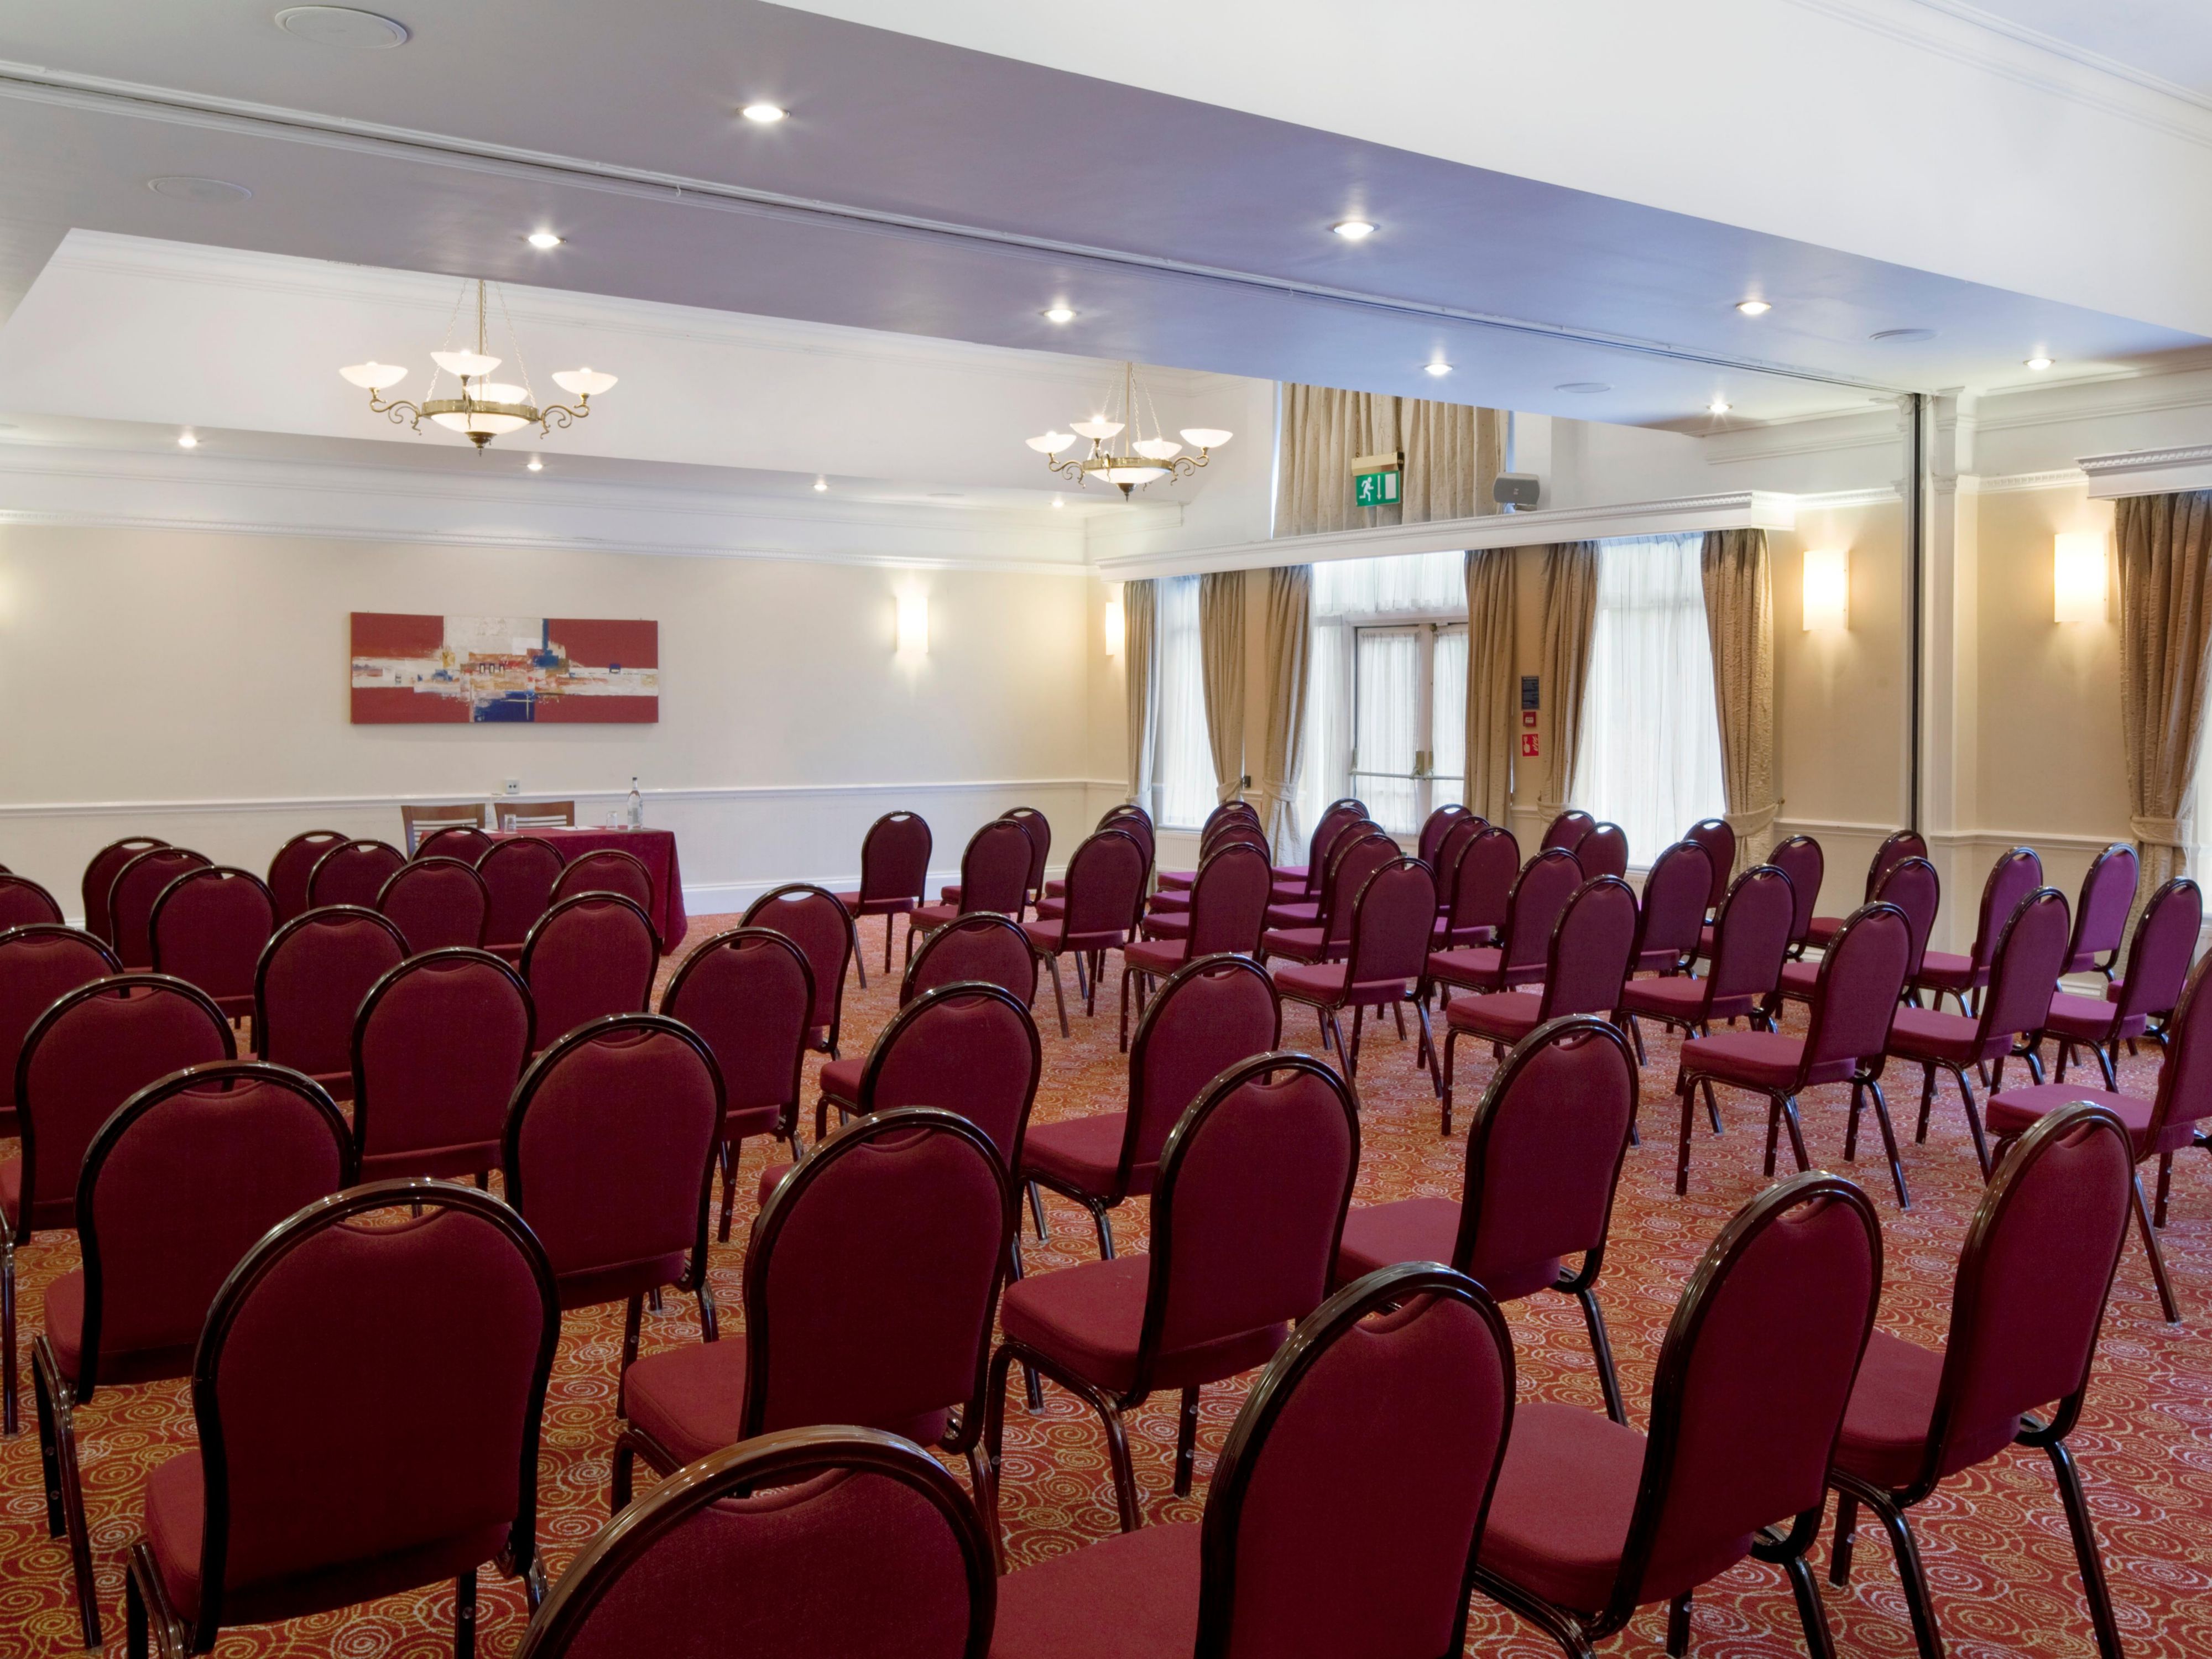 Here at Holiday Inn Ipswich Orwell, we know how to get everyone together! So whether you're looking to get the family, friends or colleagues together for a dinner, a party or a family event, leave the planning to us and let us take care of the finer details.
